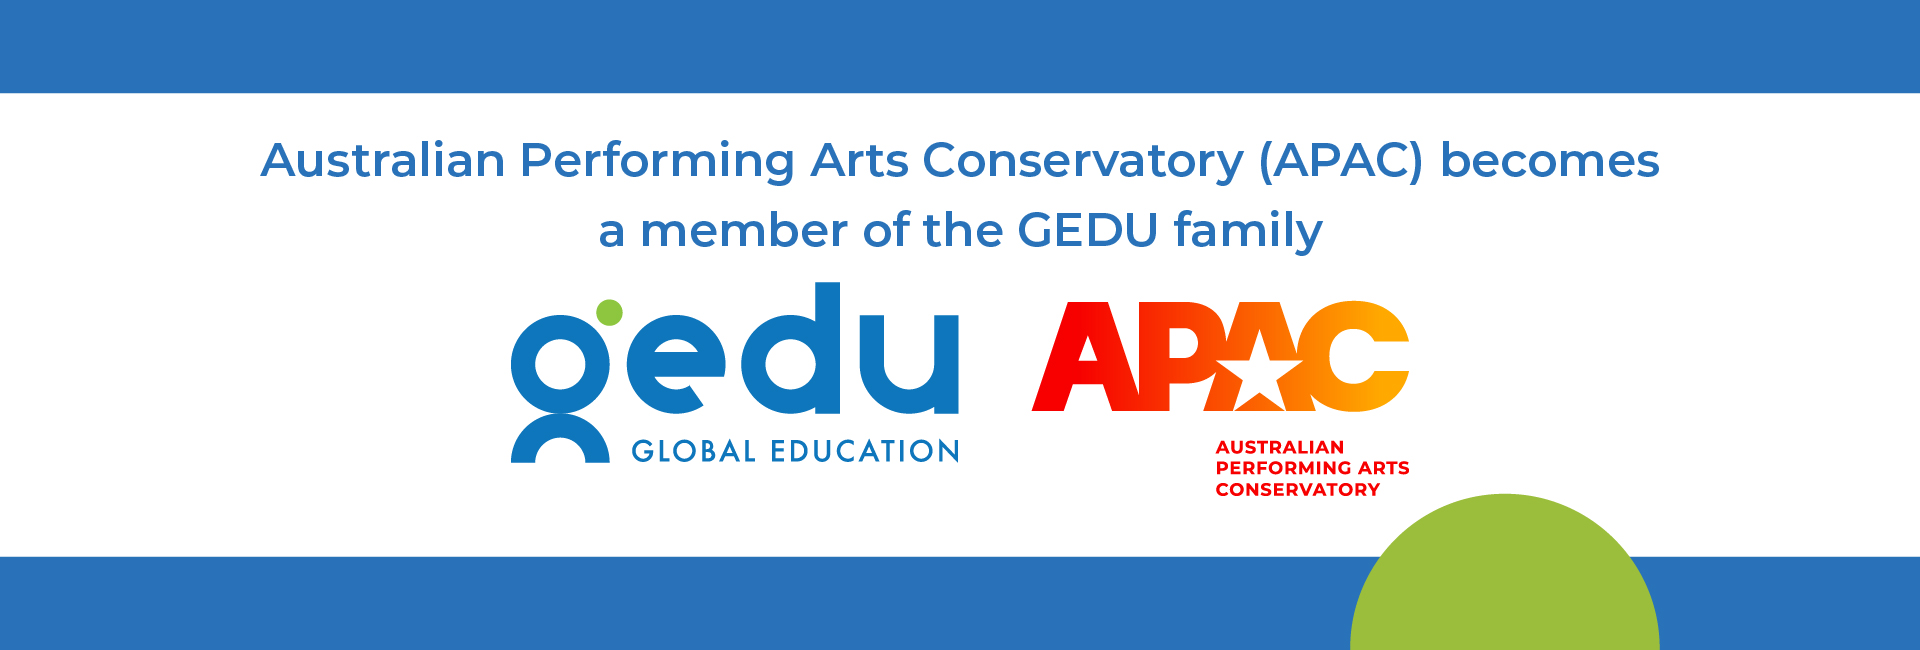 Global Education Holdings acquires Australian Performing Arts Conservatory